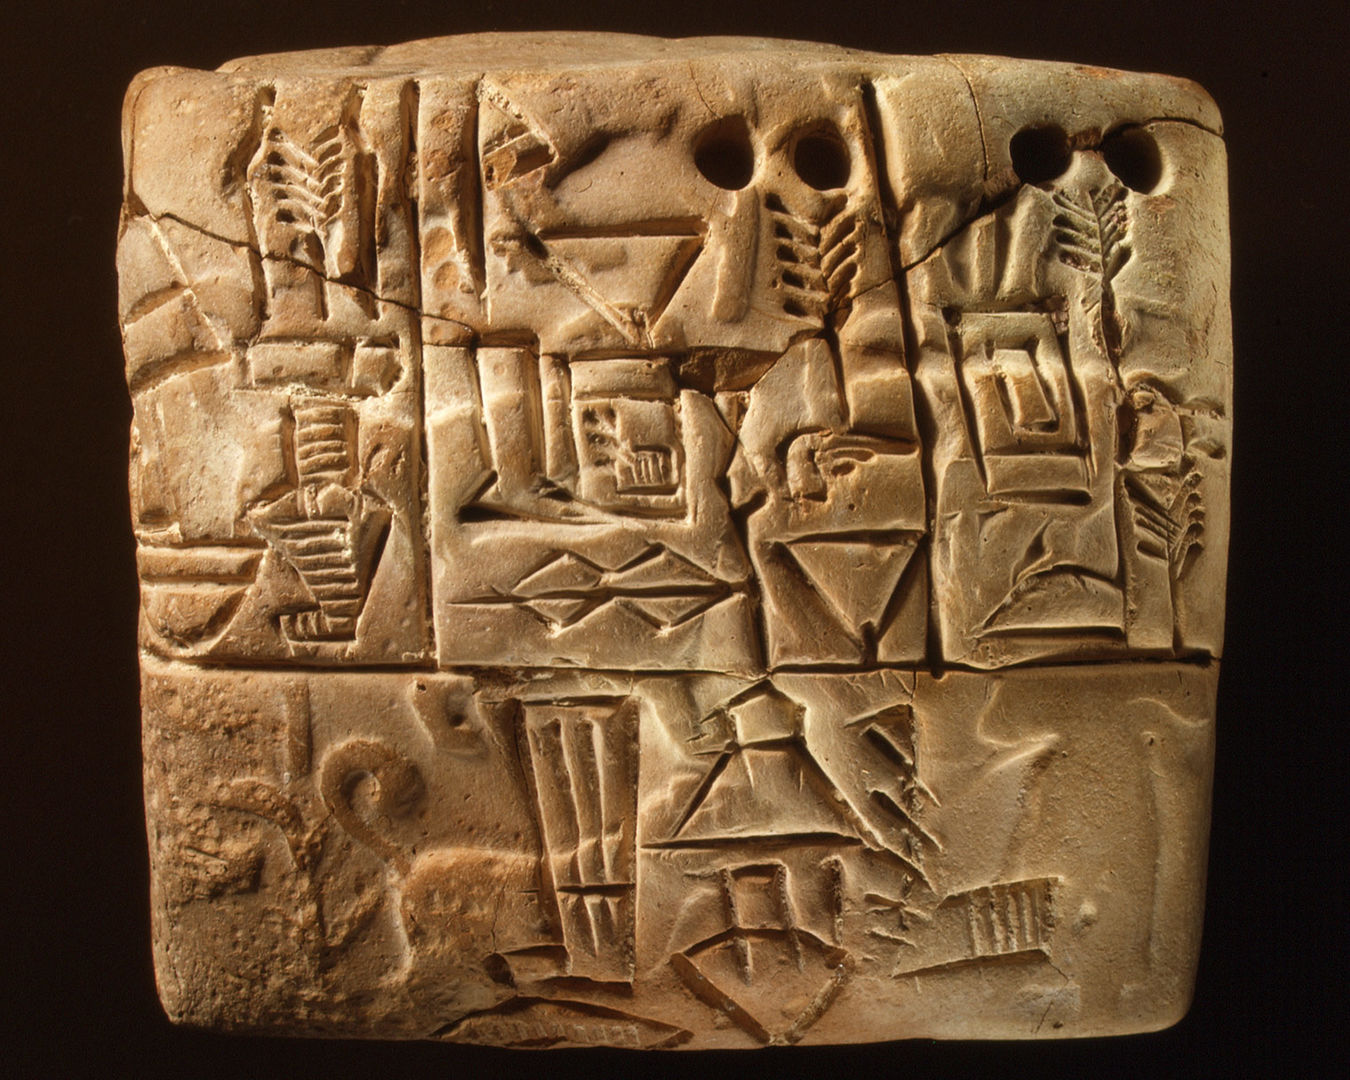 Cuneiform tablet: administrative account of barley distribution with cylinder seal impression of a male figure, hunting dogs, and boars